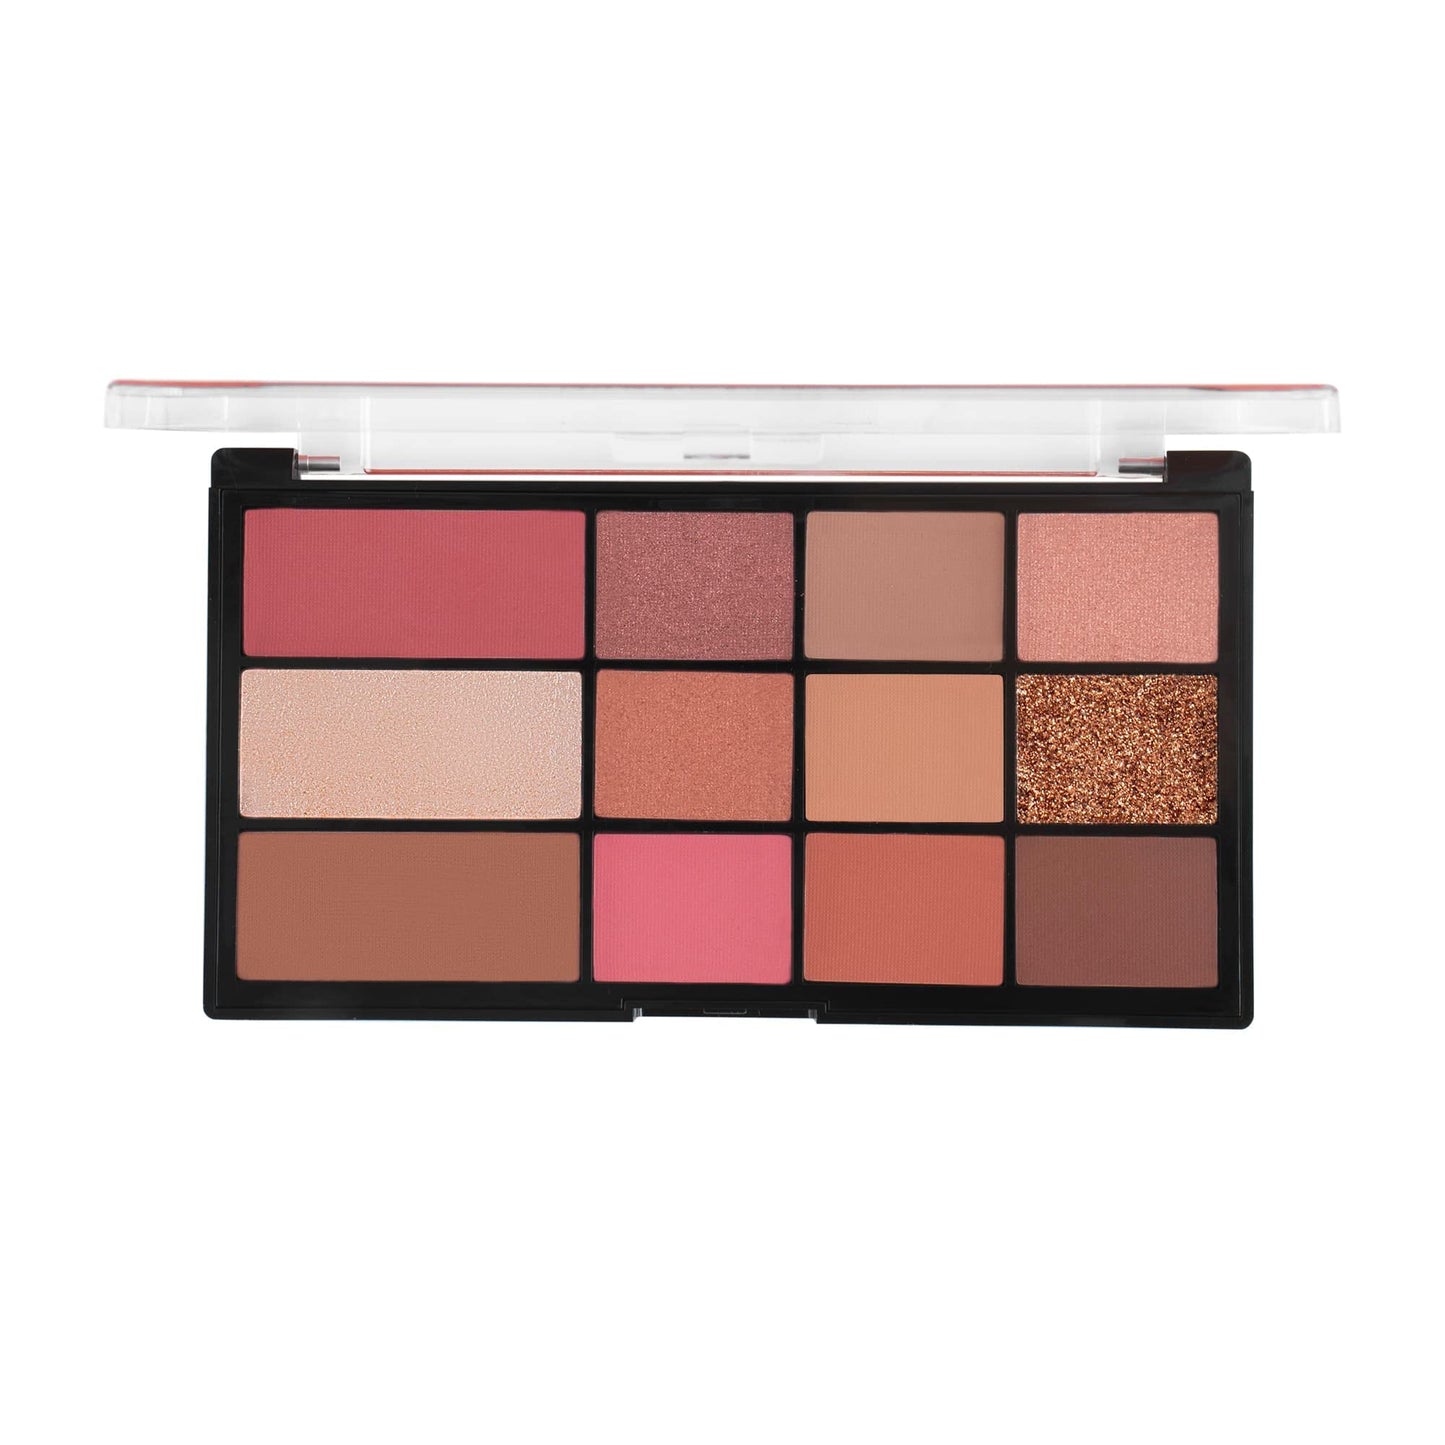 MARS All I Need Makeup And Eyeshadow Powder Kit | 9 Eyeshadows With Blusher Bronzer And Highlighter | Matte Long Lasting & Highly Pigmented (21.5 G) (Multicolor-01)